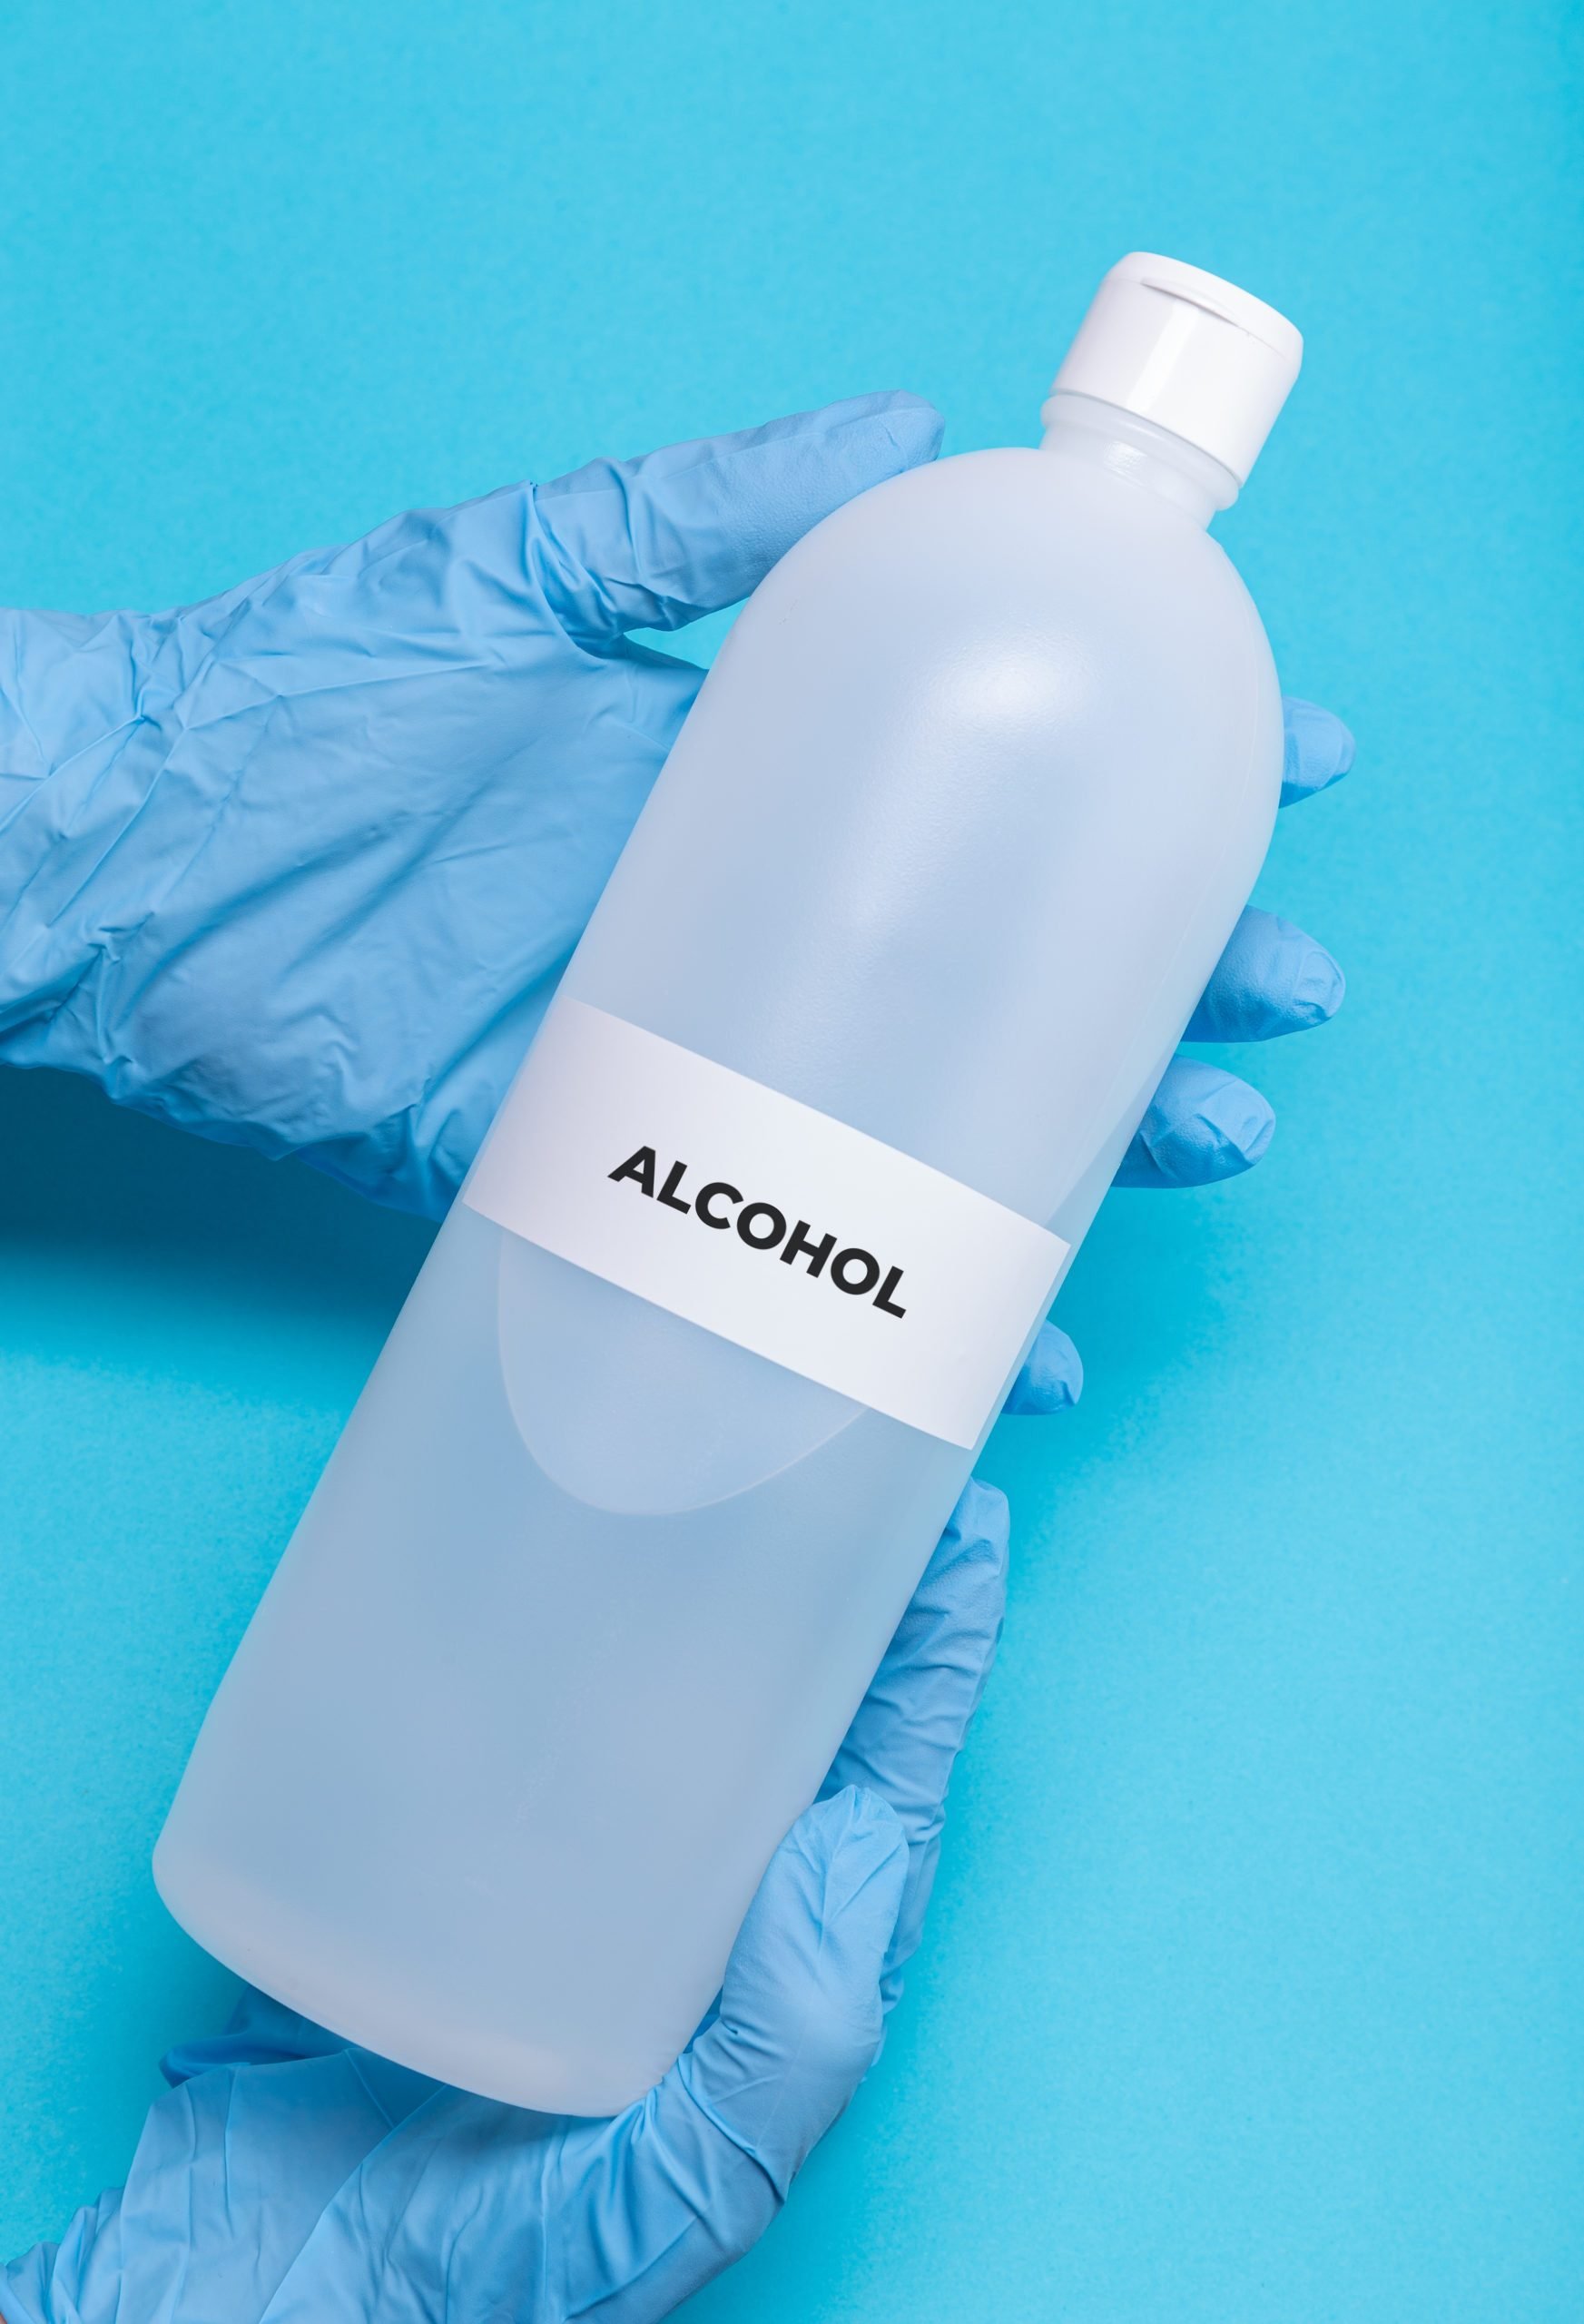 8 Uses for Rubbing Alcohol You Never Knew About (and 2 You Should Avoid)